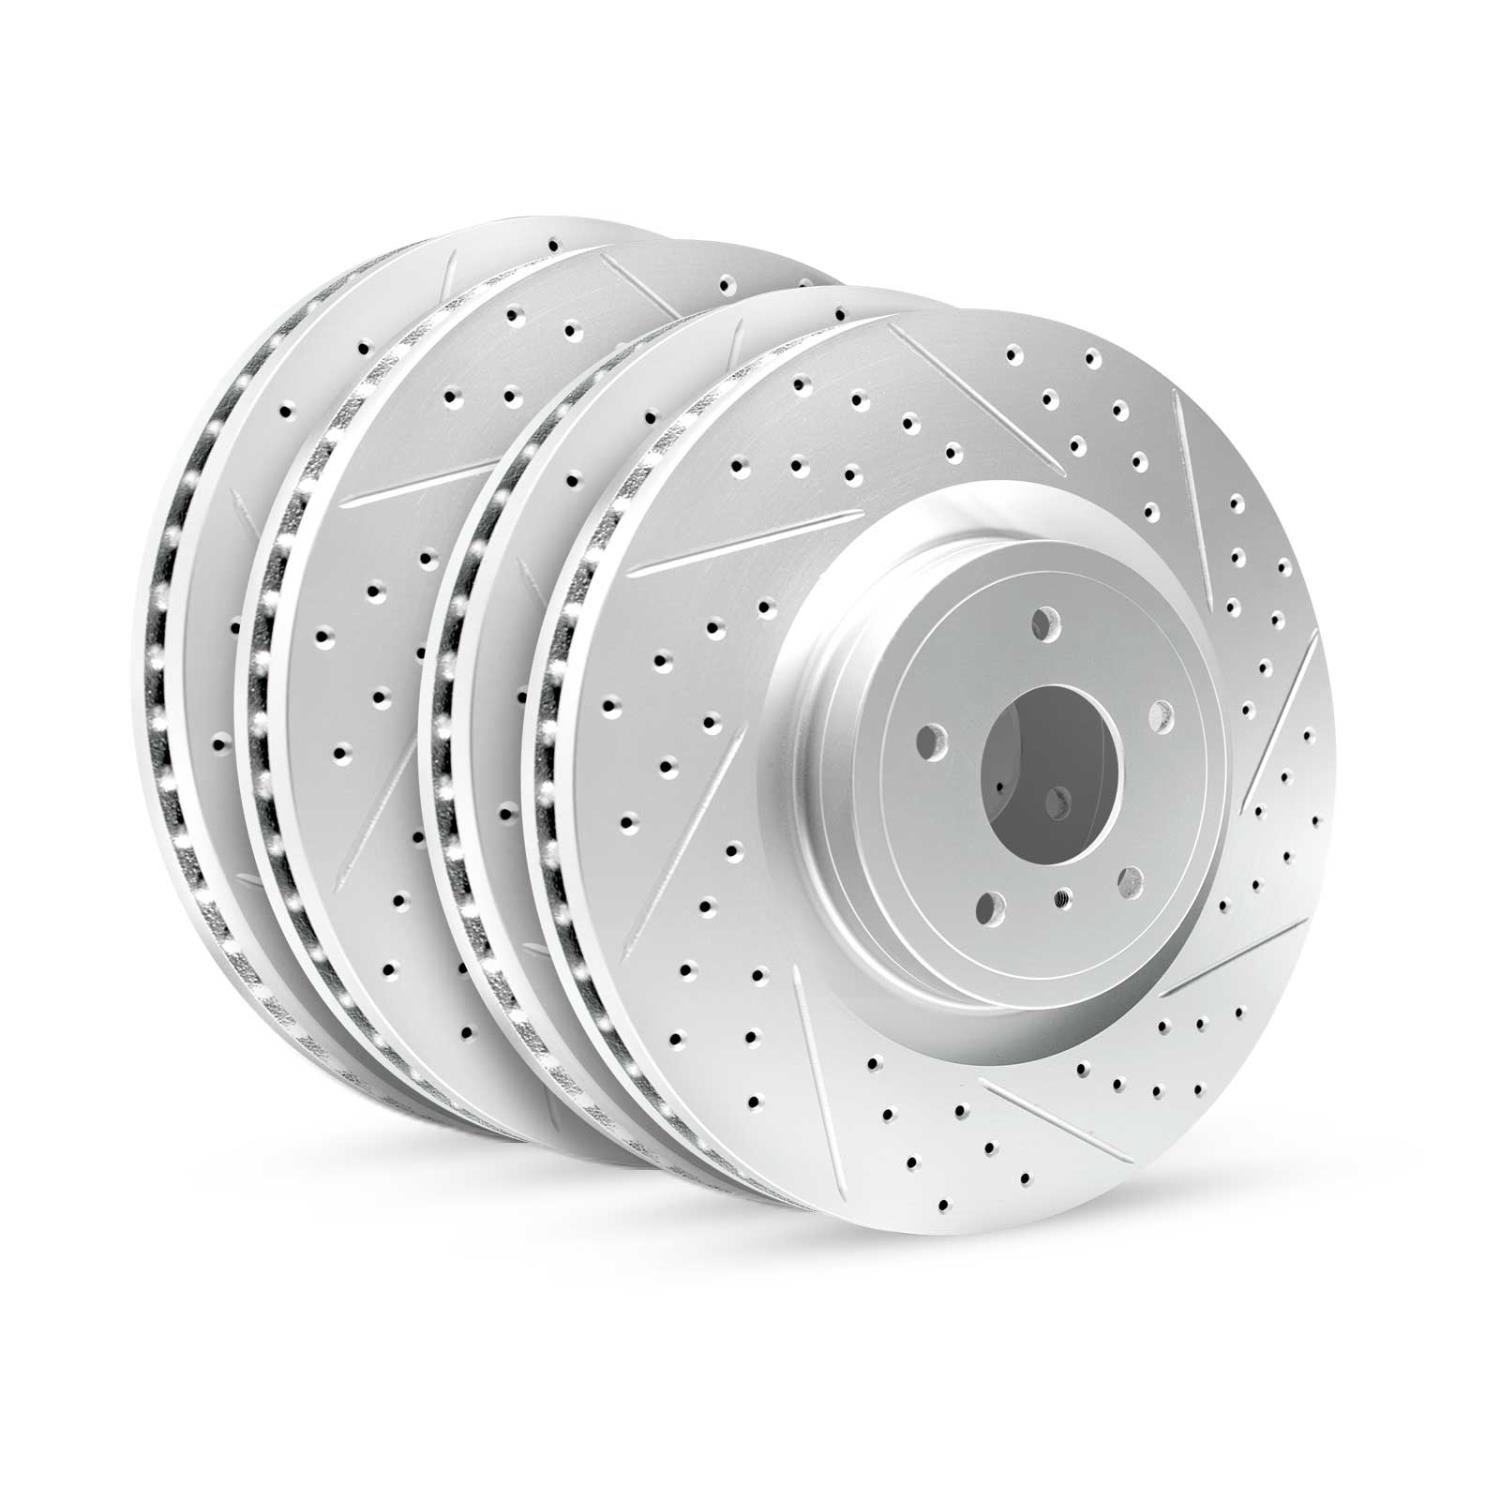 GEO-Carbon Drilled/Slotted Rotors, 2003-2019 Infiniti/Nissan, Position: Front/Rear